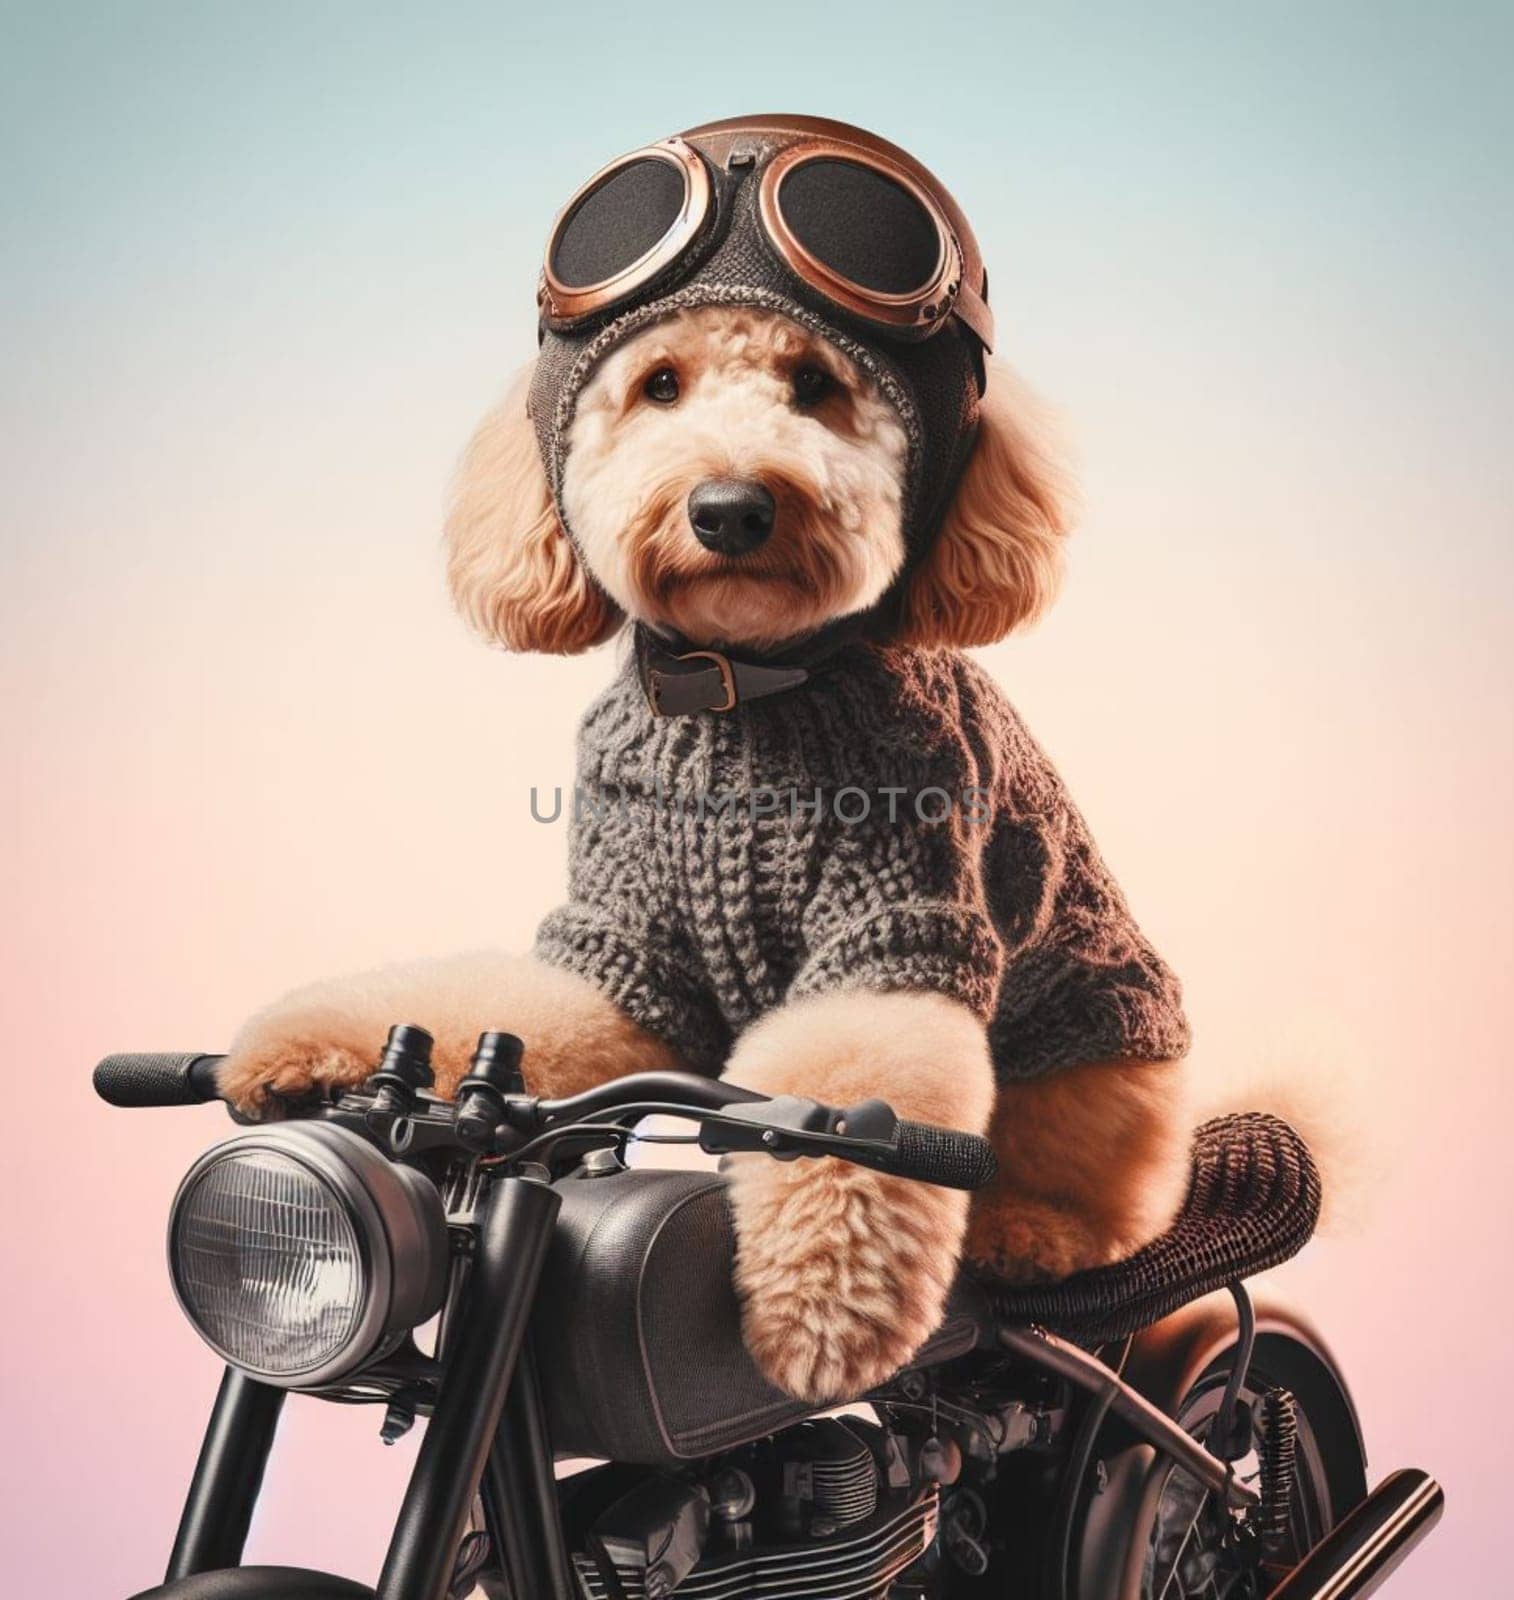 labradoodle portrait riding hot rod steampunk motorcycles wearing ponchos and goggles by verbano